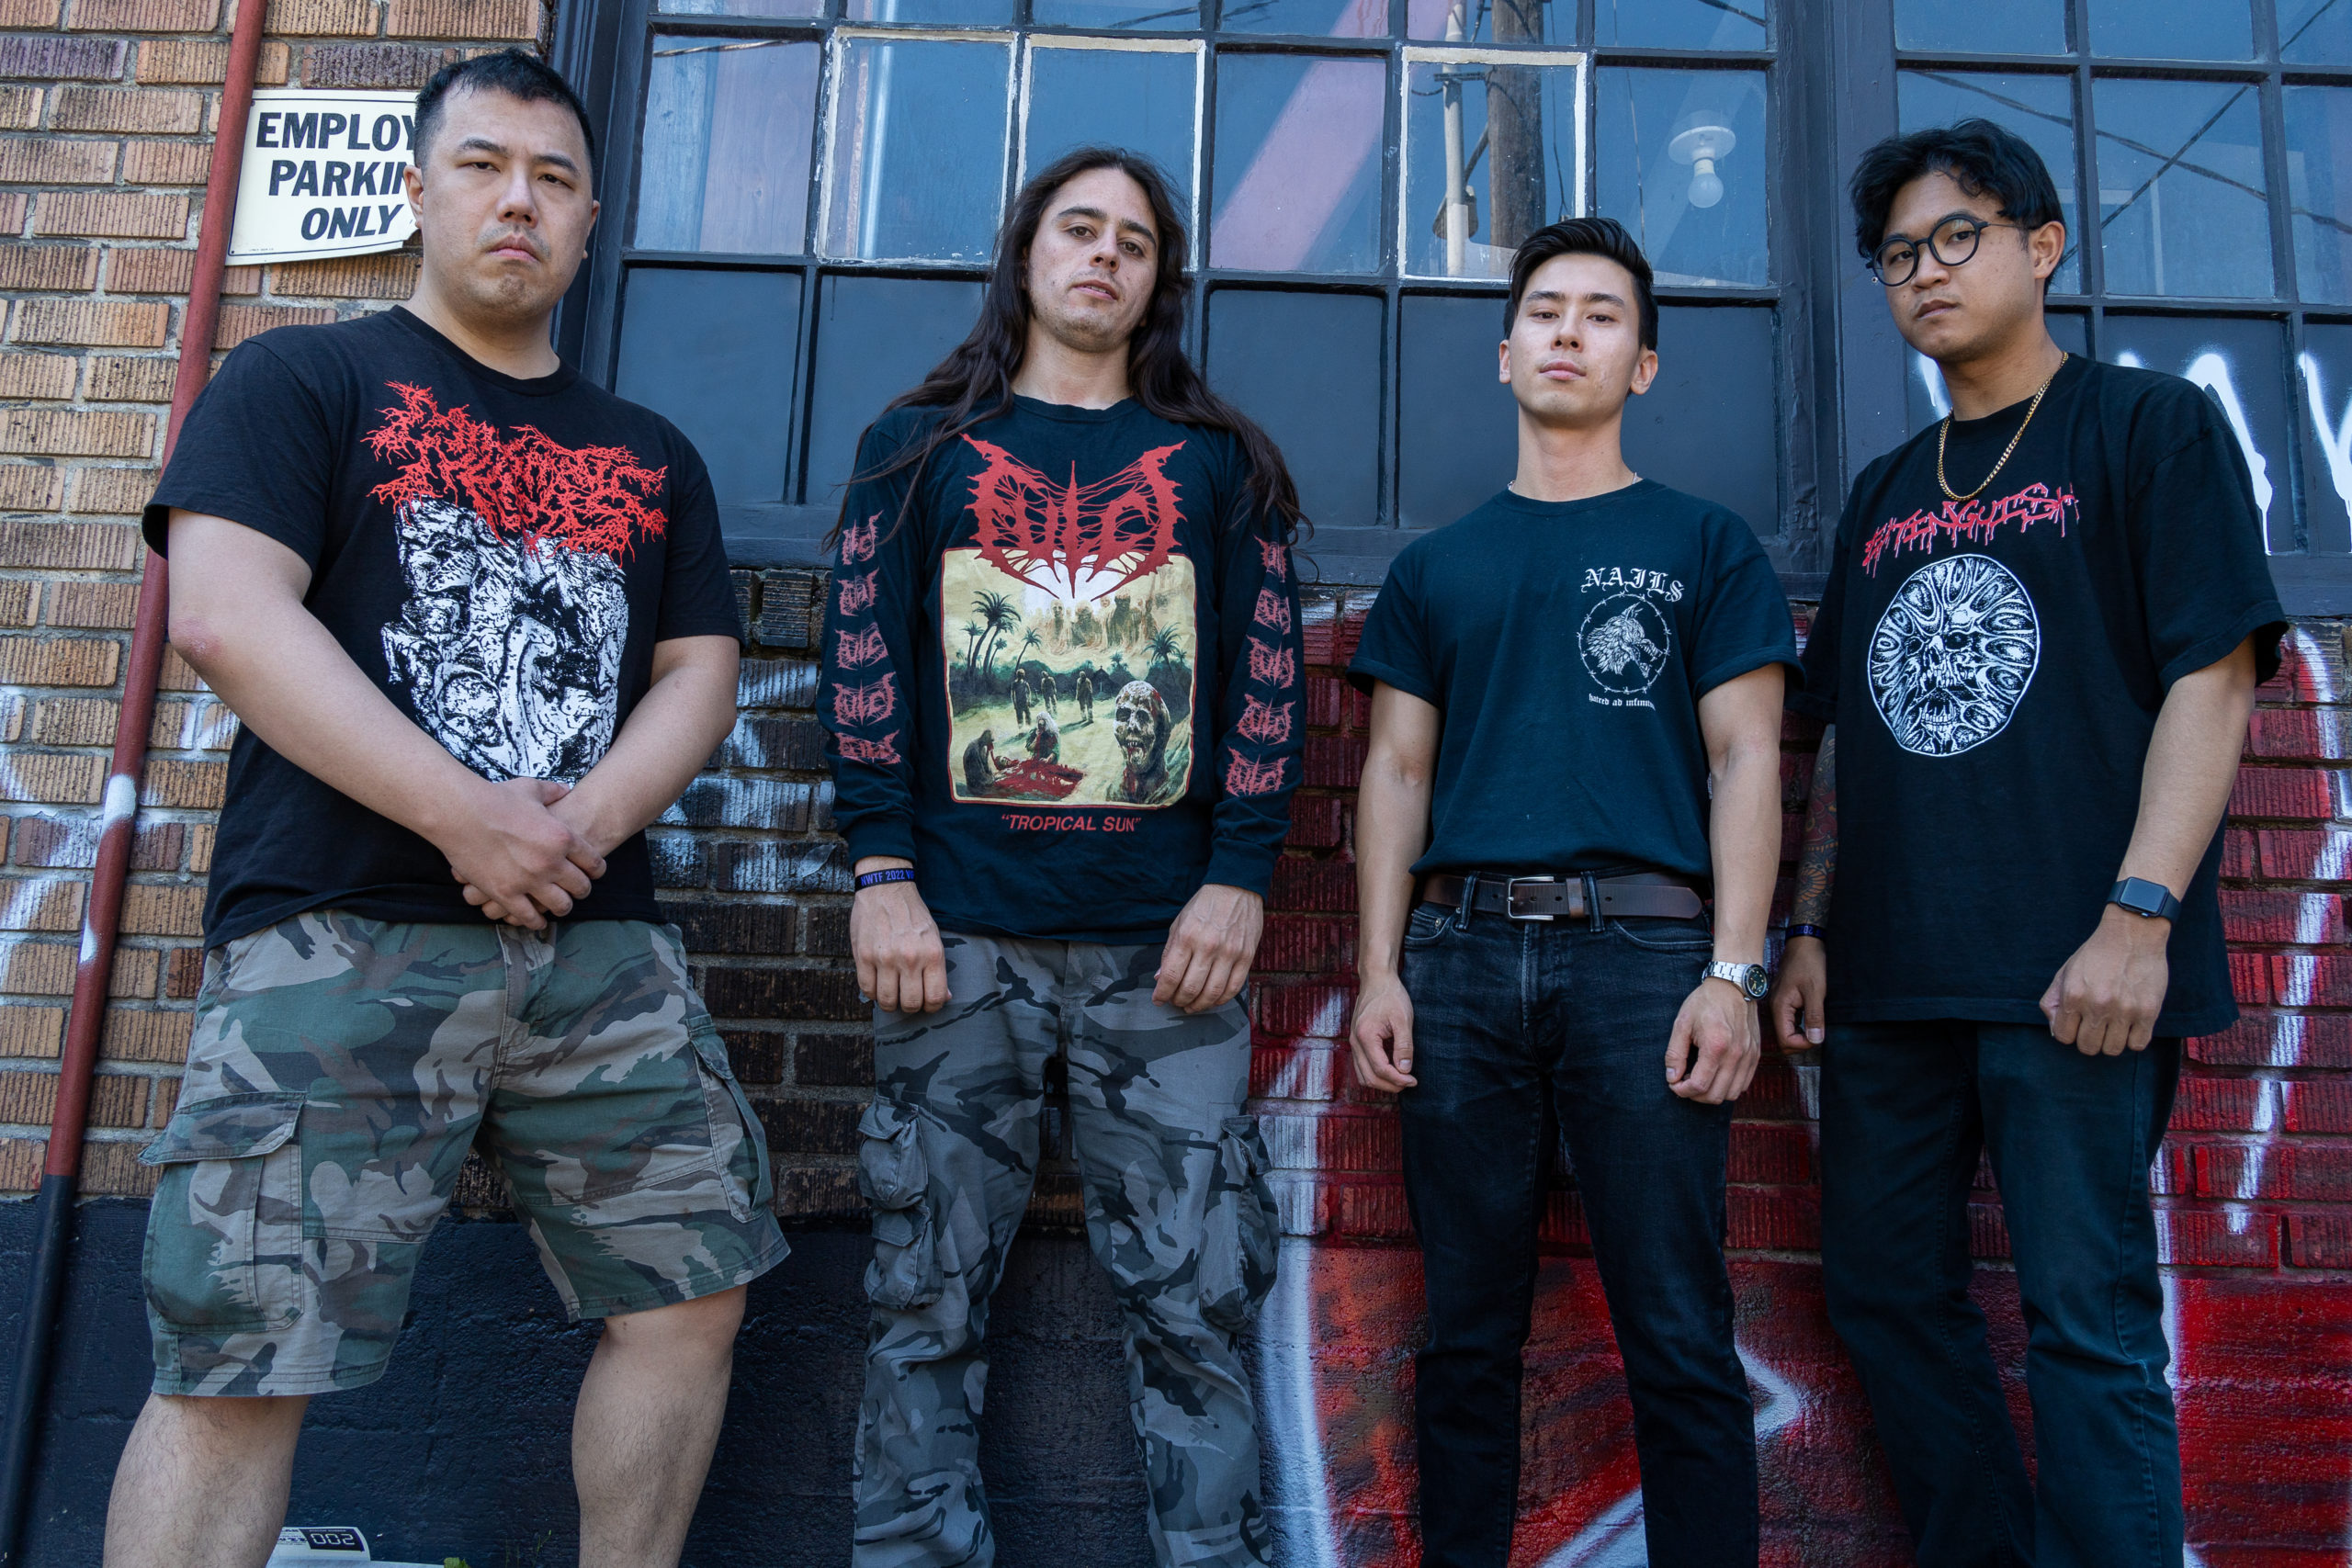 RIPPED TO SHREDS Shares New Song “漢奸 (Race Traitor);” 劇變 